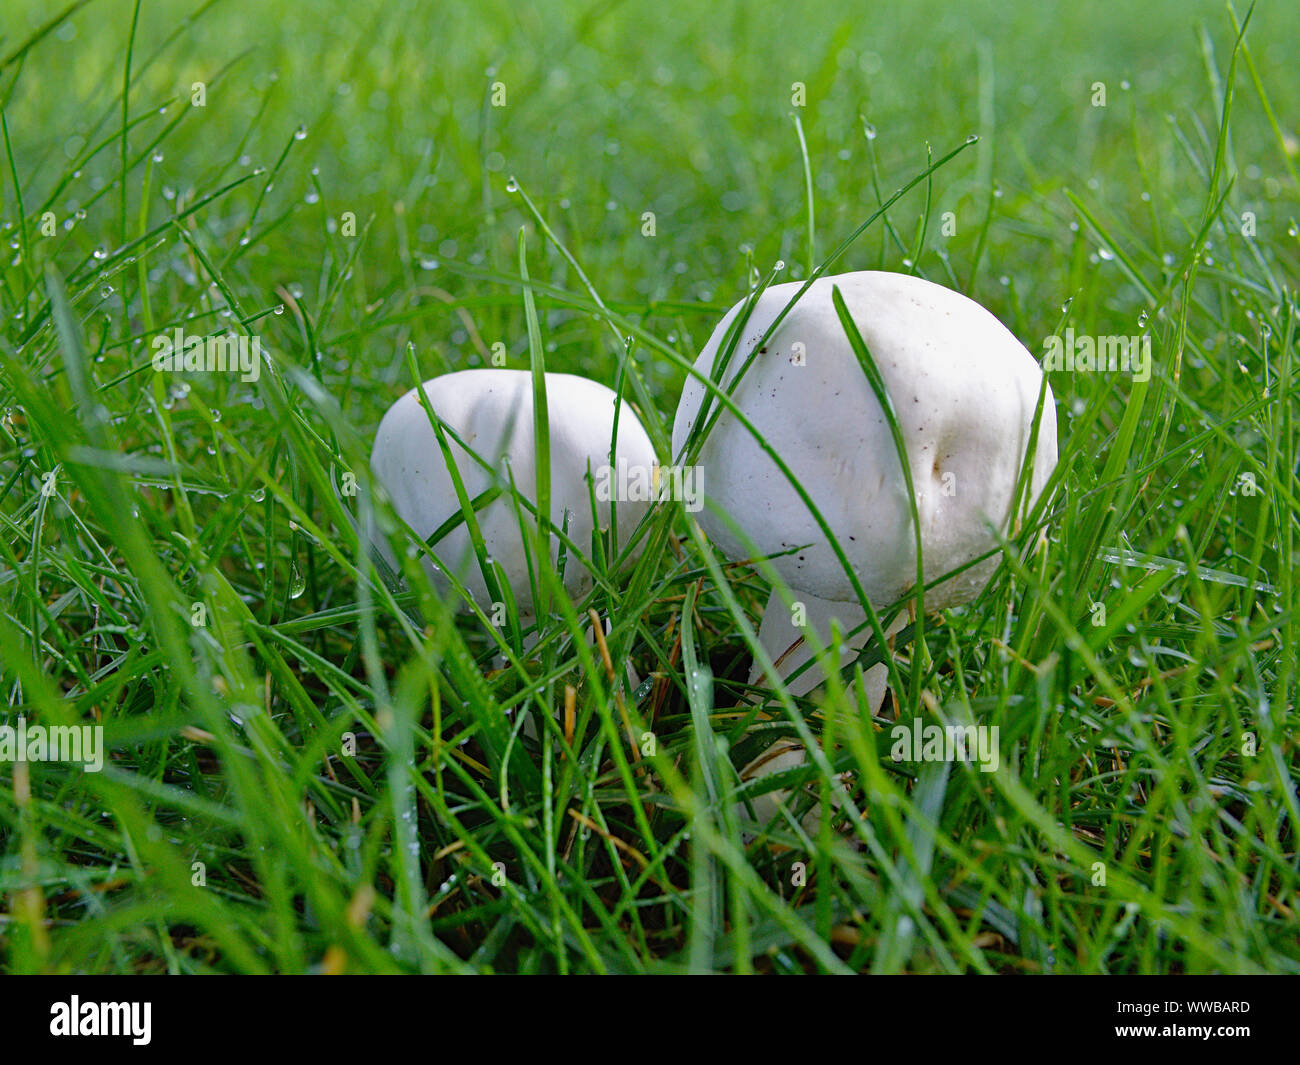 Mushrooms proliferating during a warm, wet, late Summer, Ottawa, Ontario, Canada. Field Mushroom (Agaricus campestris) in wet grass, early morning. Stock Photo